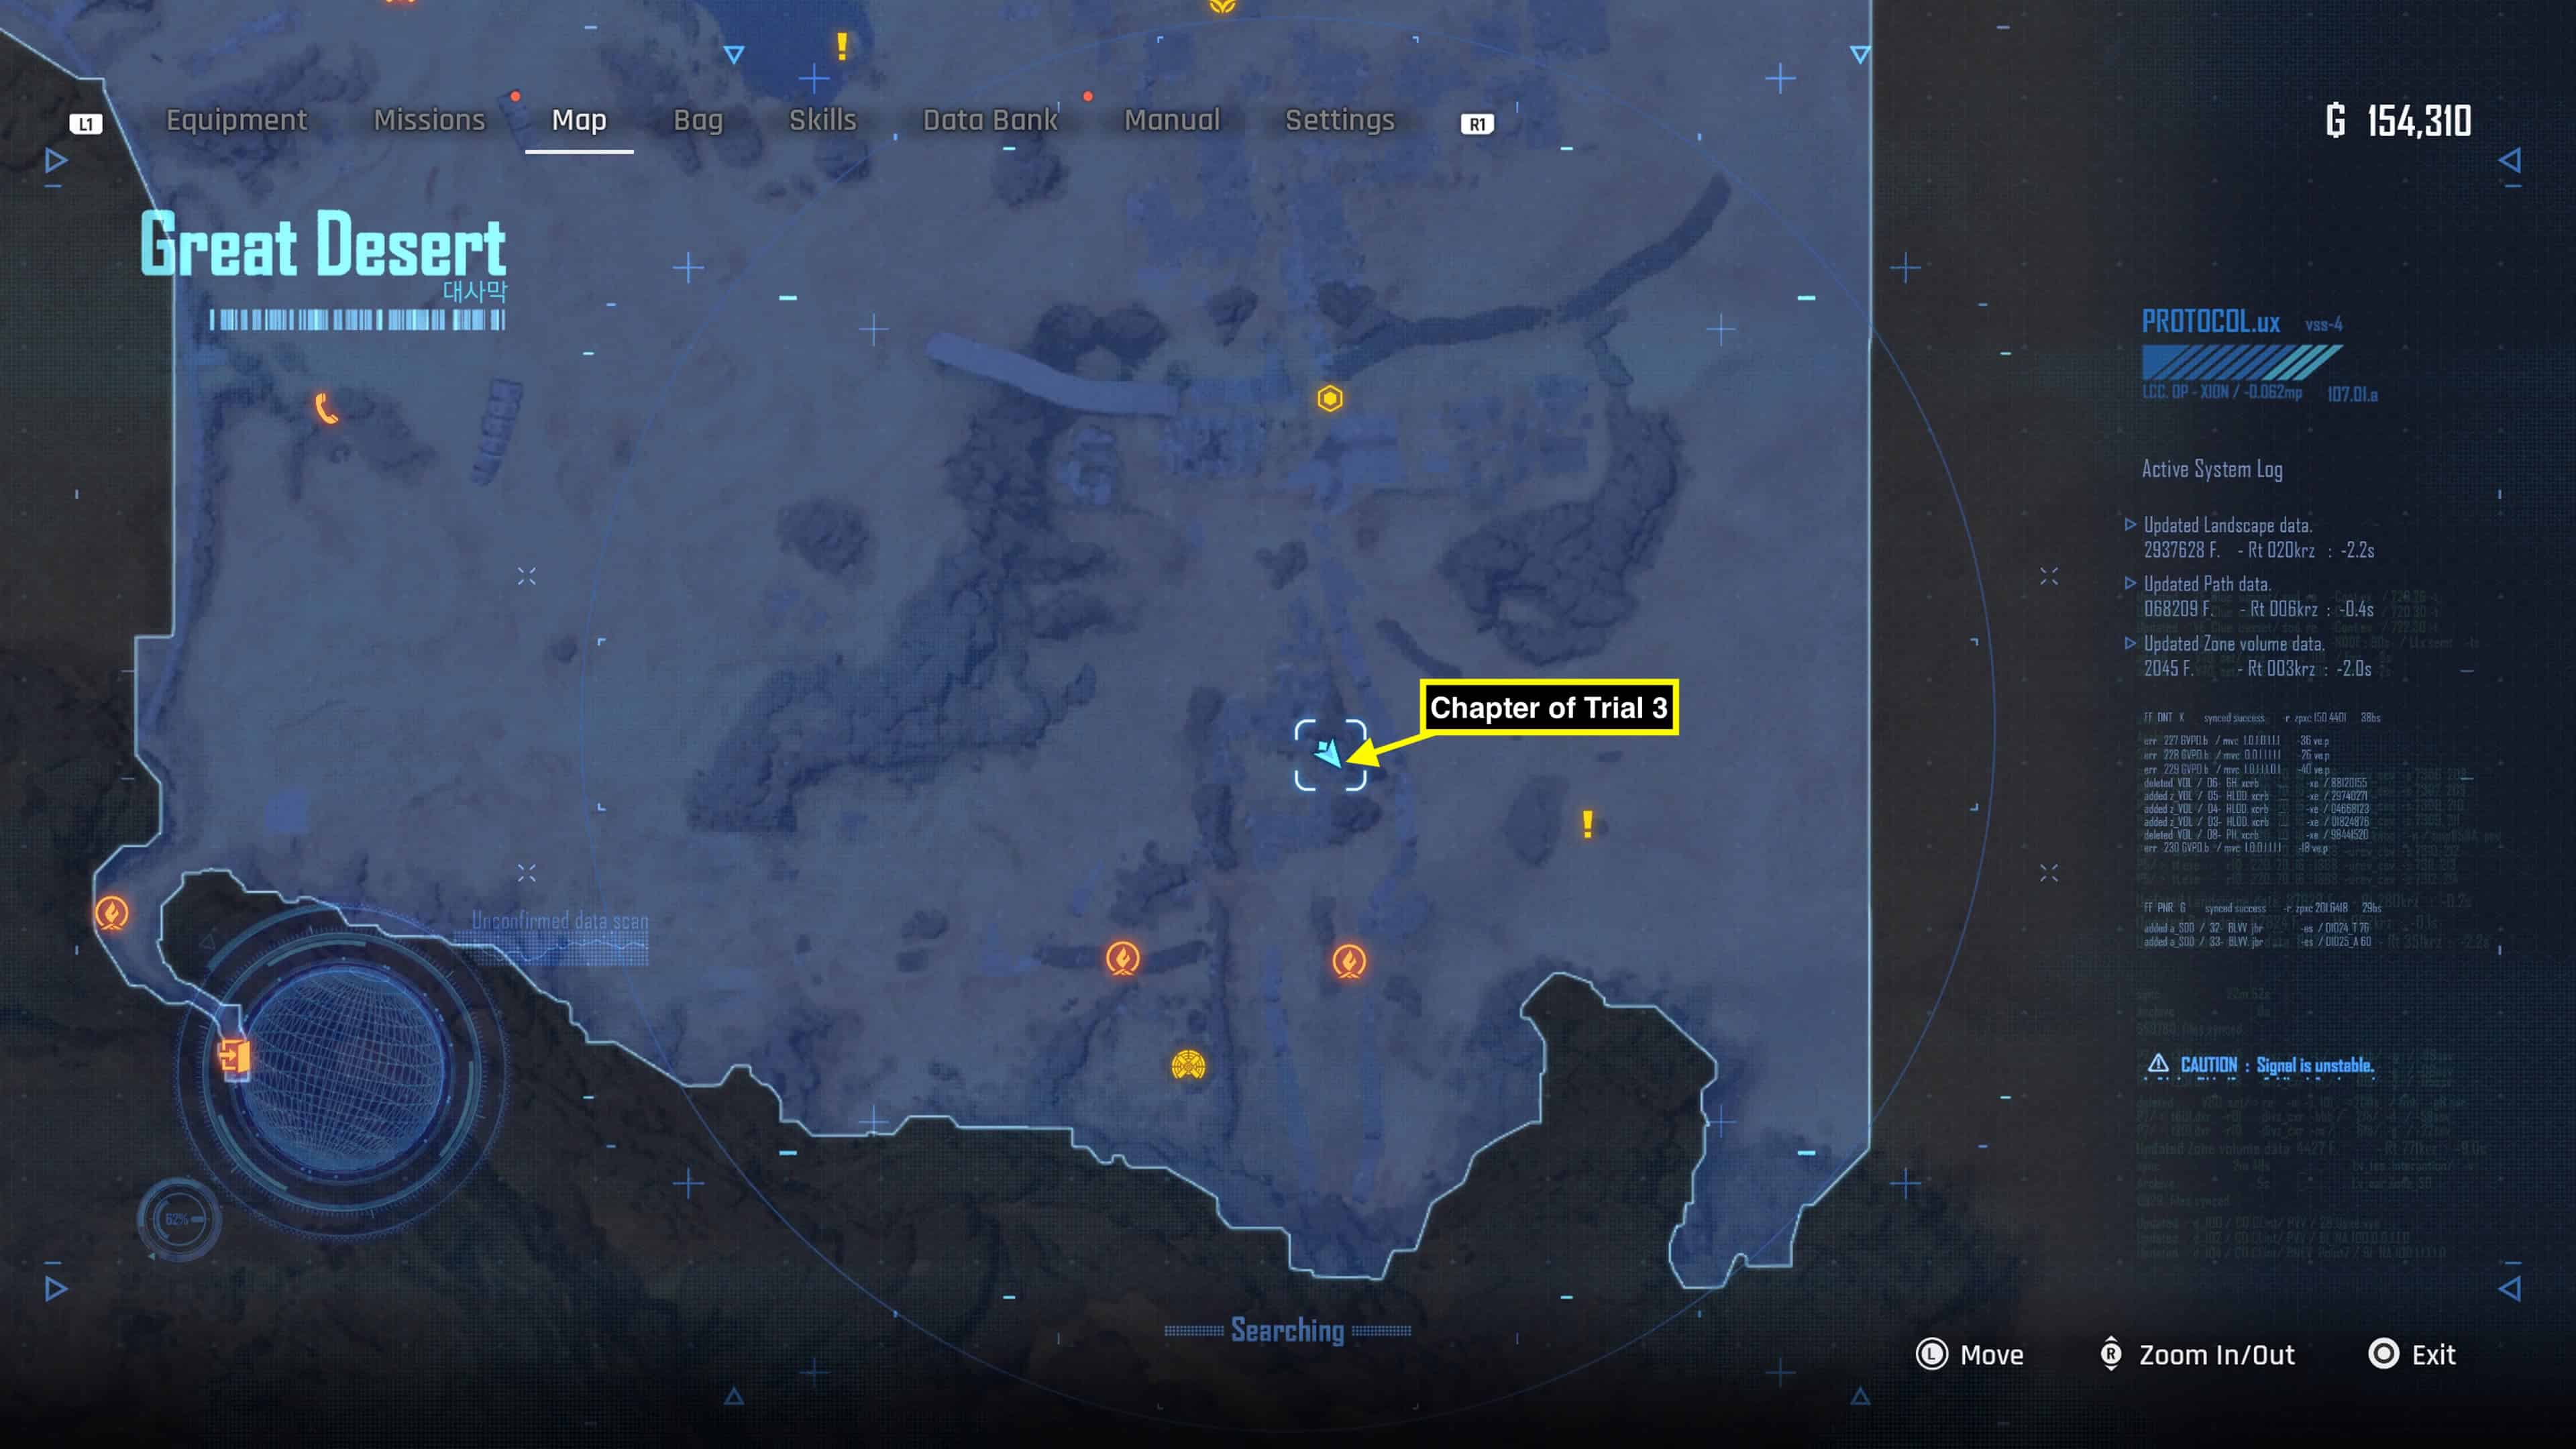 Stellar Blade recruit passcode specialists - in-game map showing the great desert